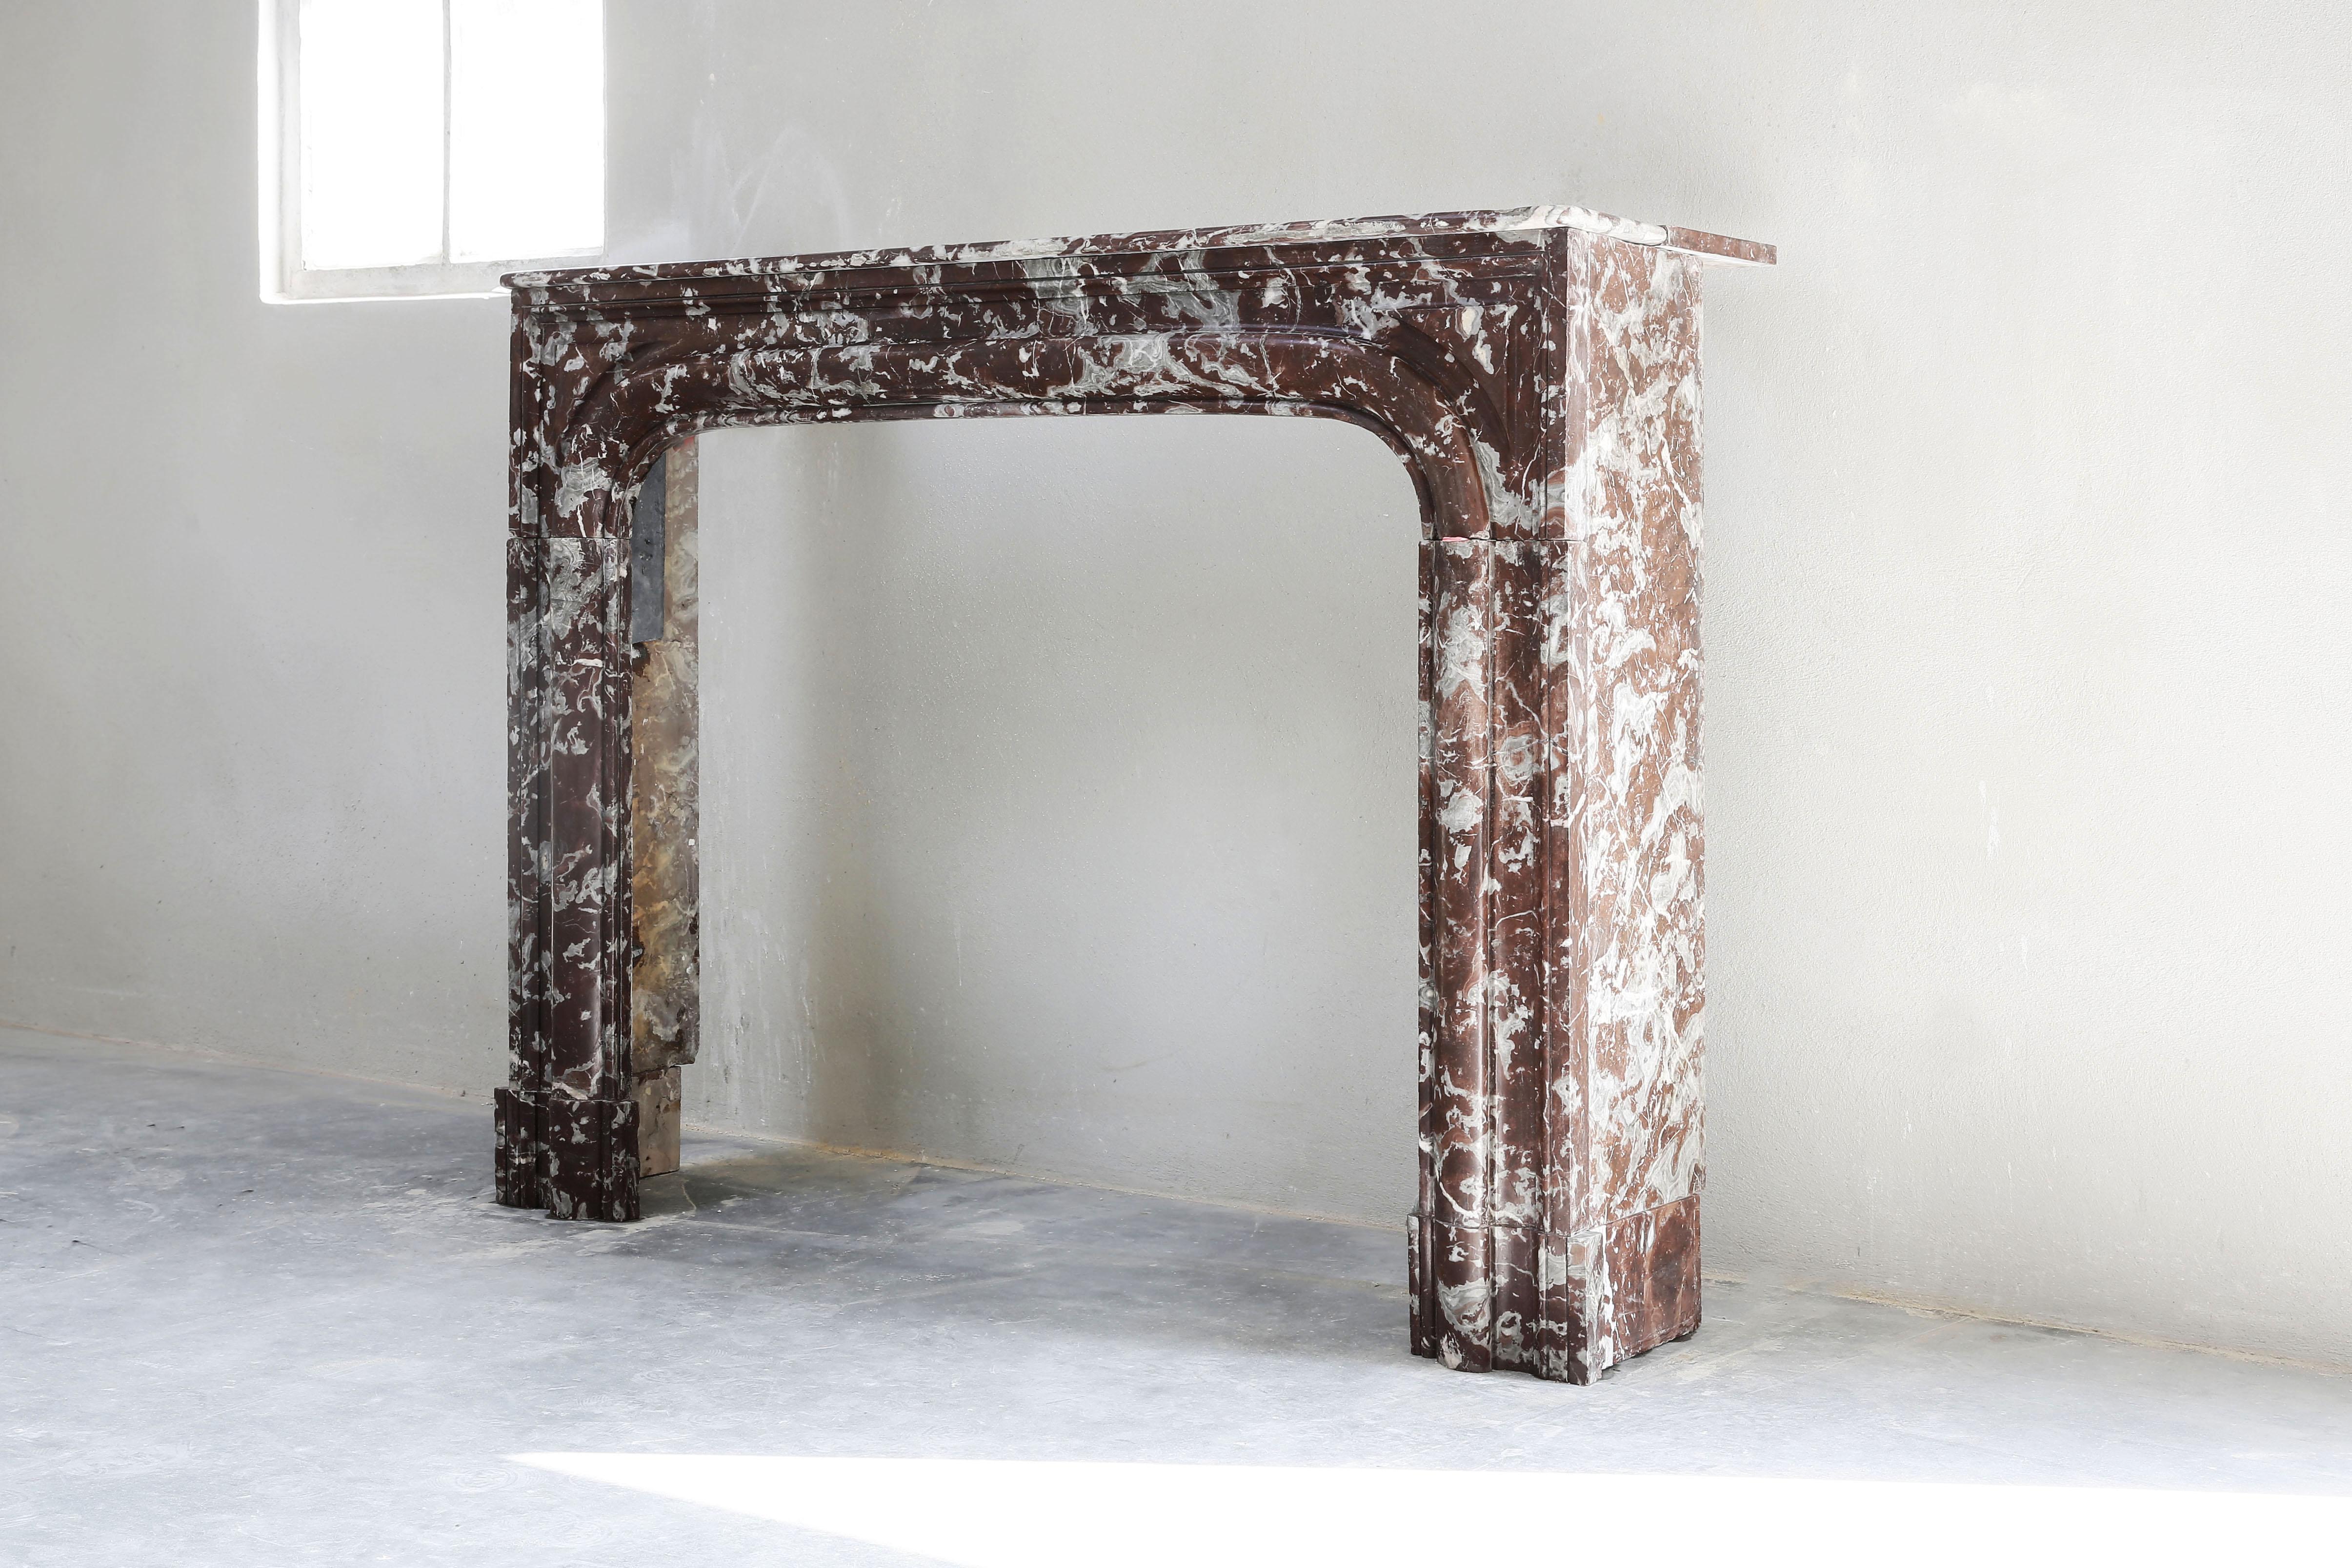 A unique marble fireplace from the marble variety Griotte Rouge de Belgique. The color of the fireplace is brown with white/gray veins, a warm mixture with color nuance! The antique fireplace dates back to the 19th century and is in Louis XIV style.